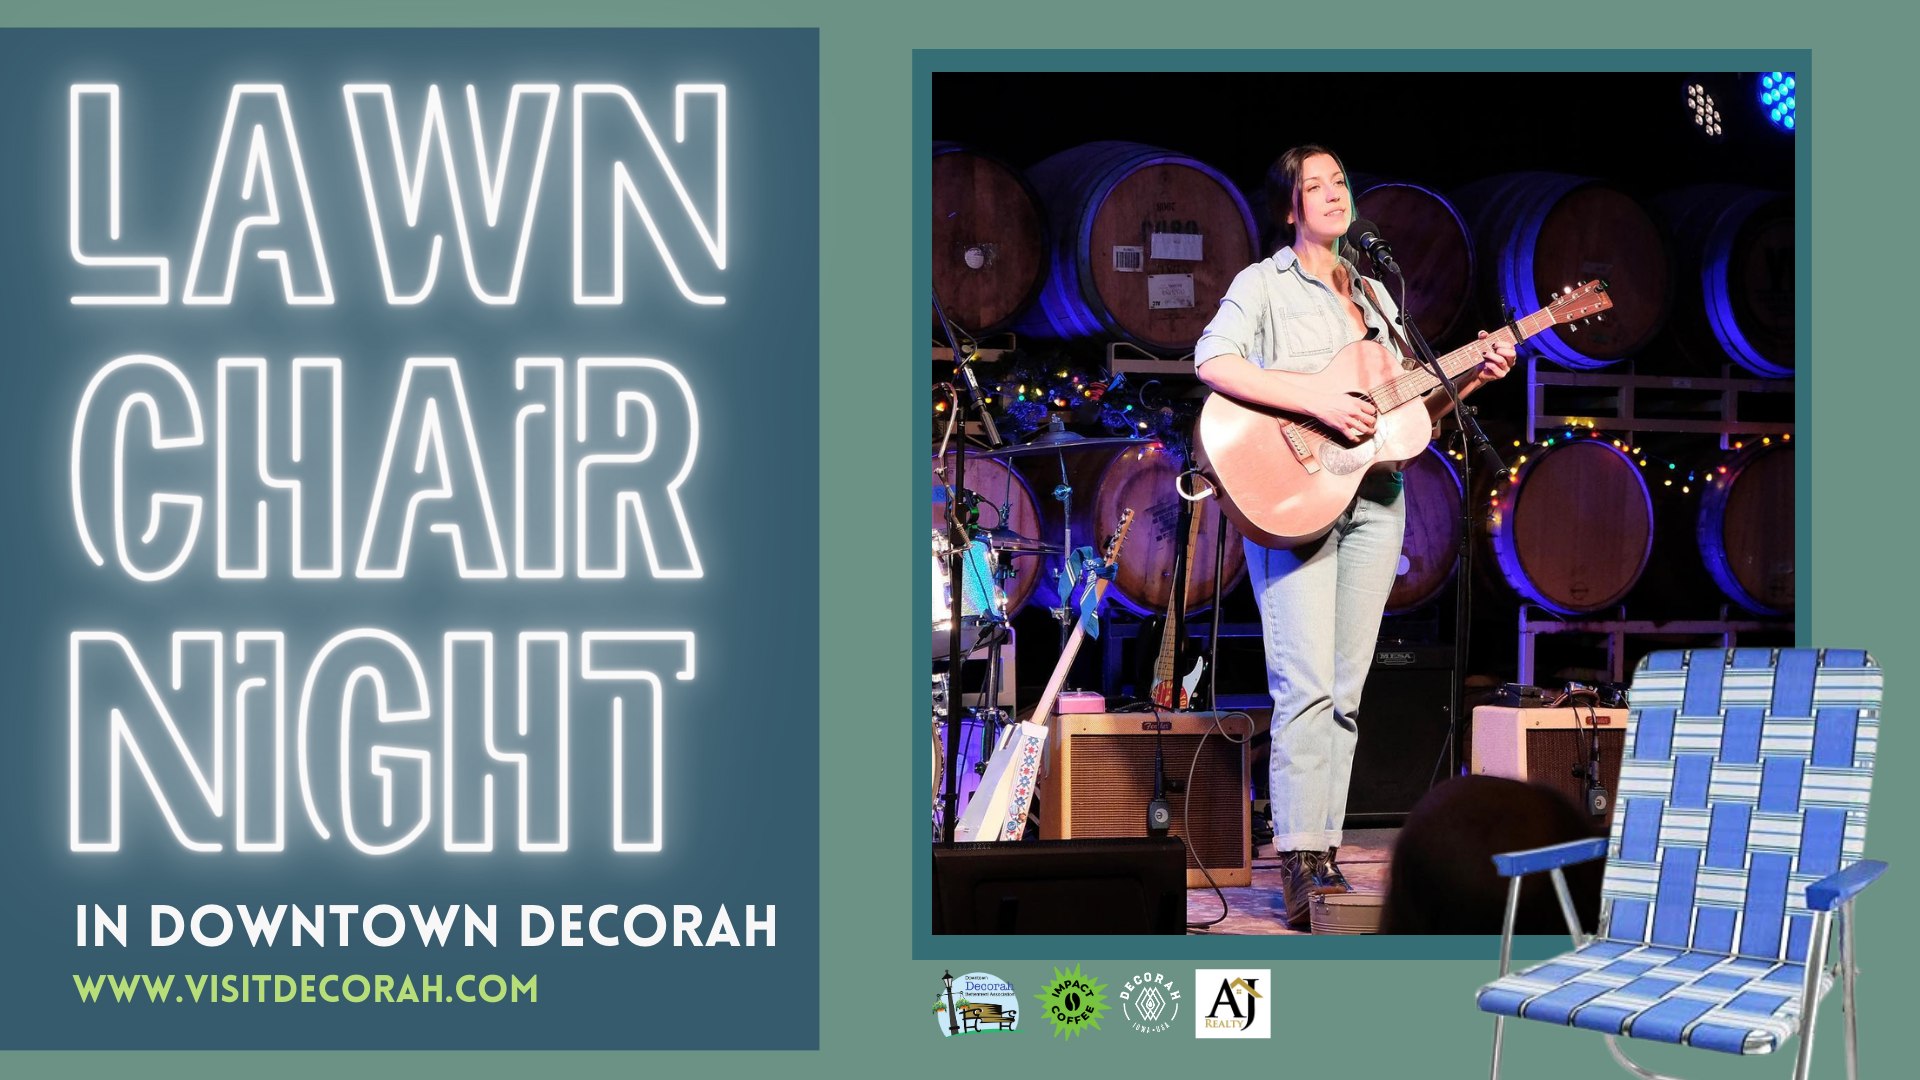 Lawn Chair Night in Downtown Decorah: Clare Doyle thumbnail